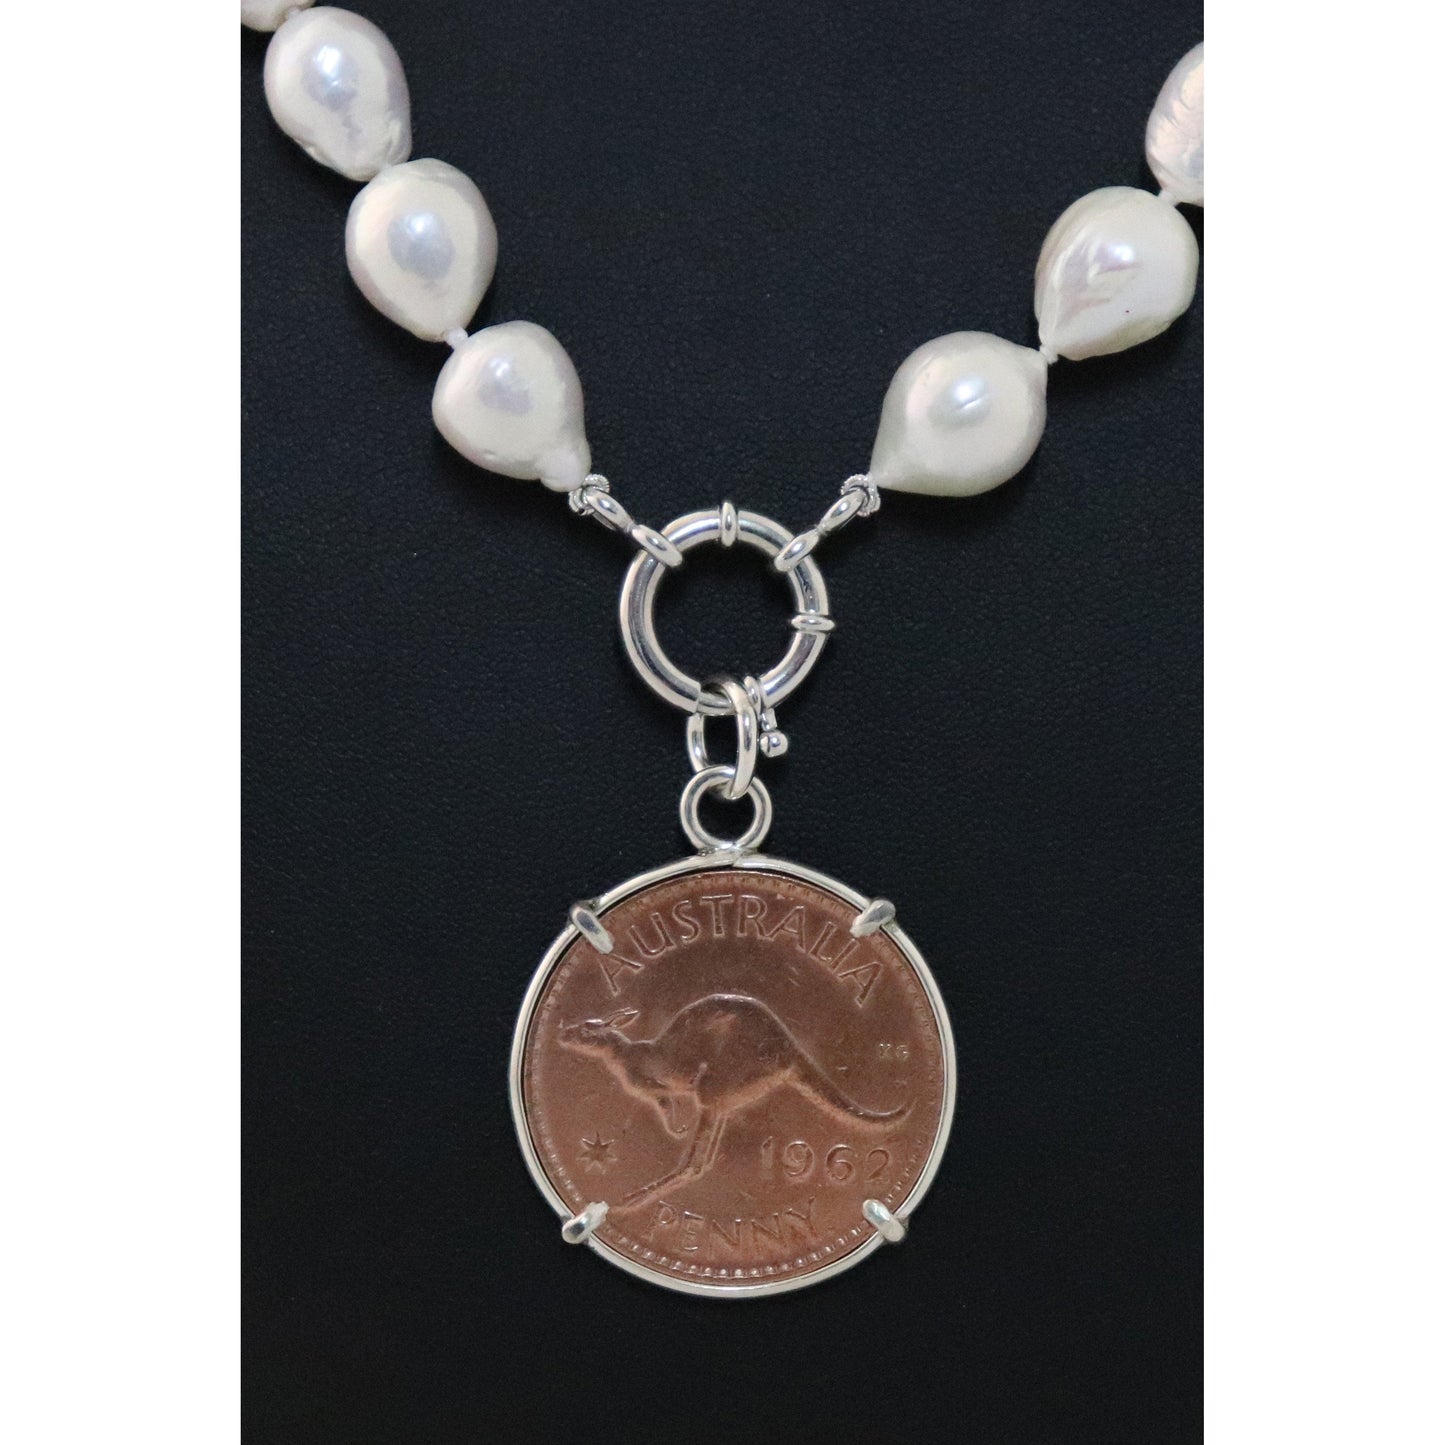 Pearl necklace with kangaroo coin pendant.